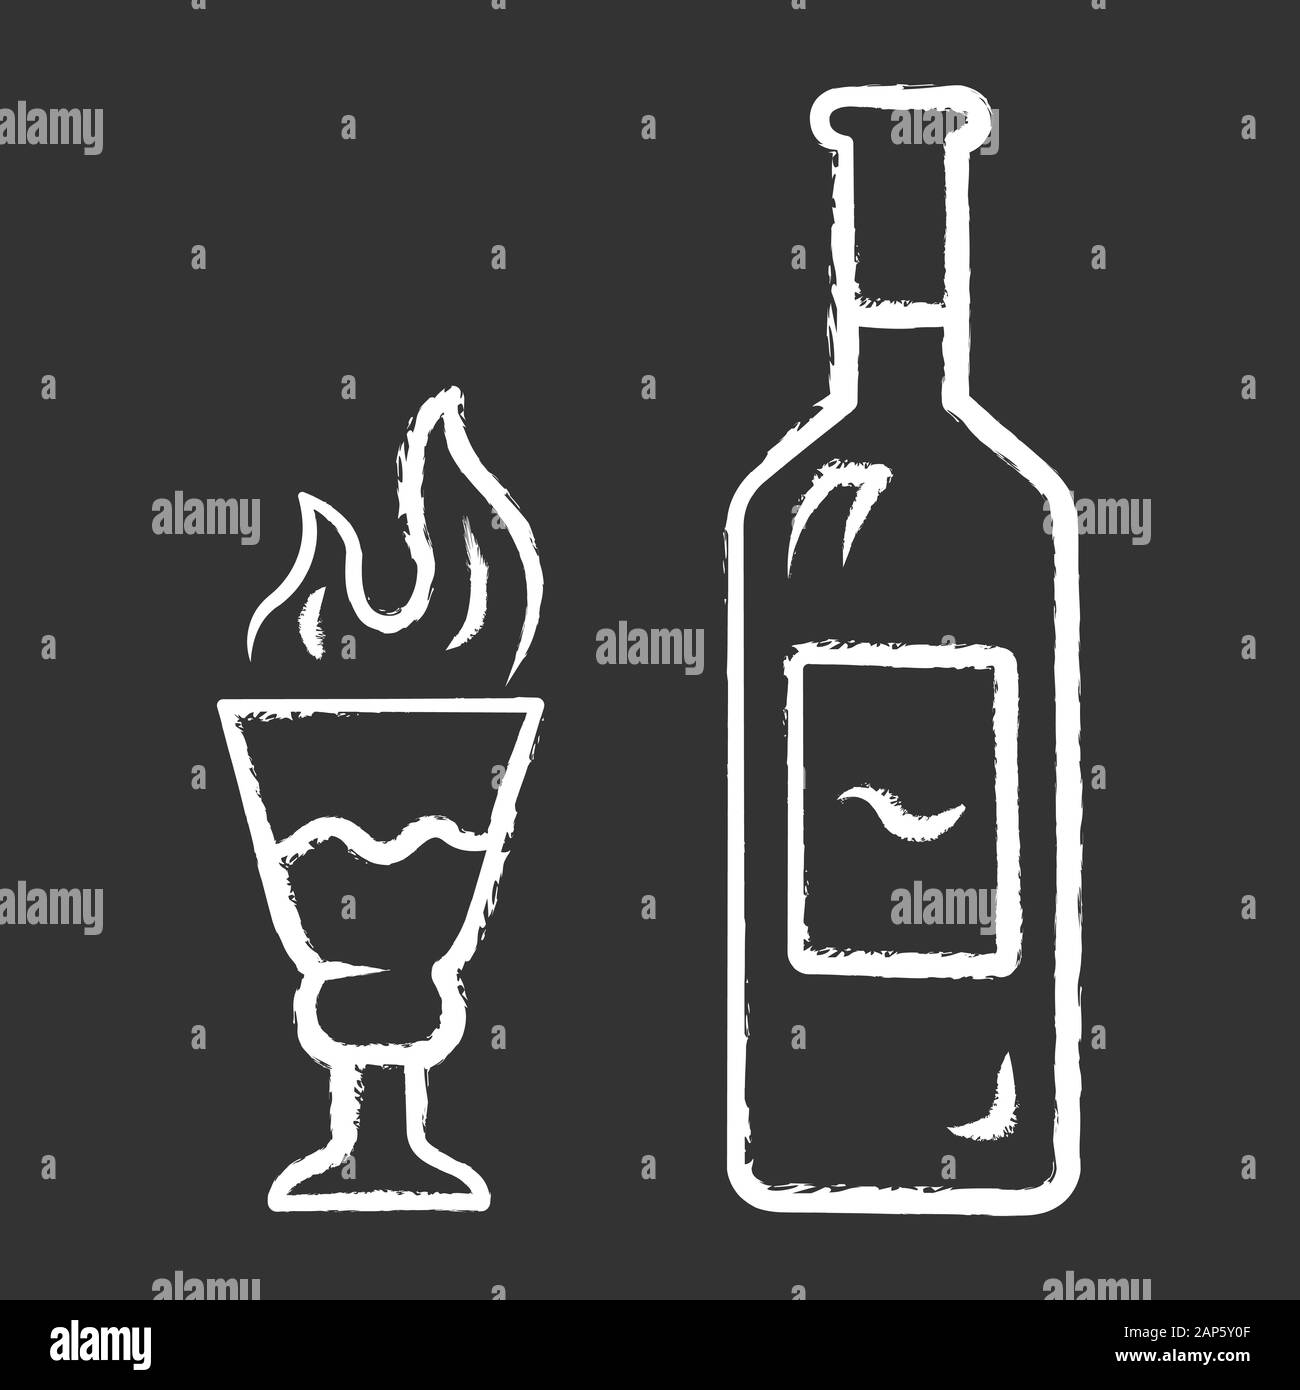 https://c8.alamy.com/comp/2AP5Y0F/absinthe-chalk-icon-bottle-and-tall-footed-glass-with-flaming-shot-distilled-highly-alcoholic-beverage-herbal-liquor-alcohol-bar-drink-booze-iso-2AP5Y0F.jpg